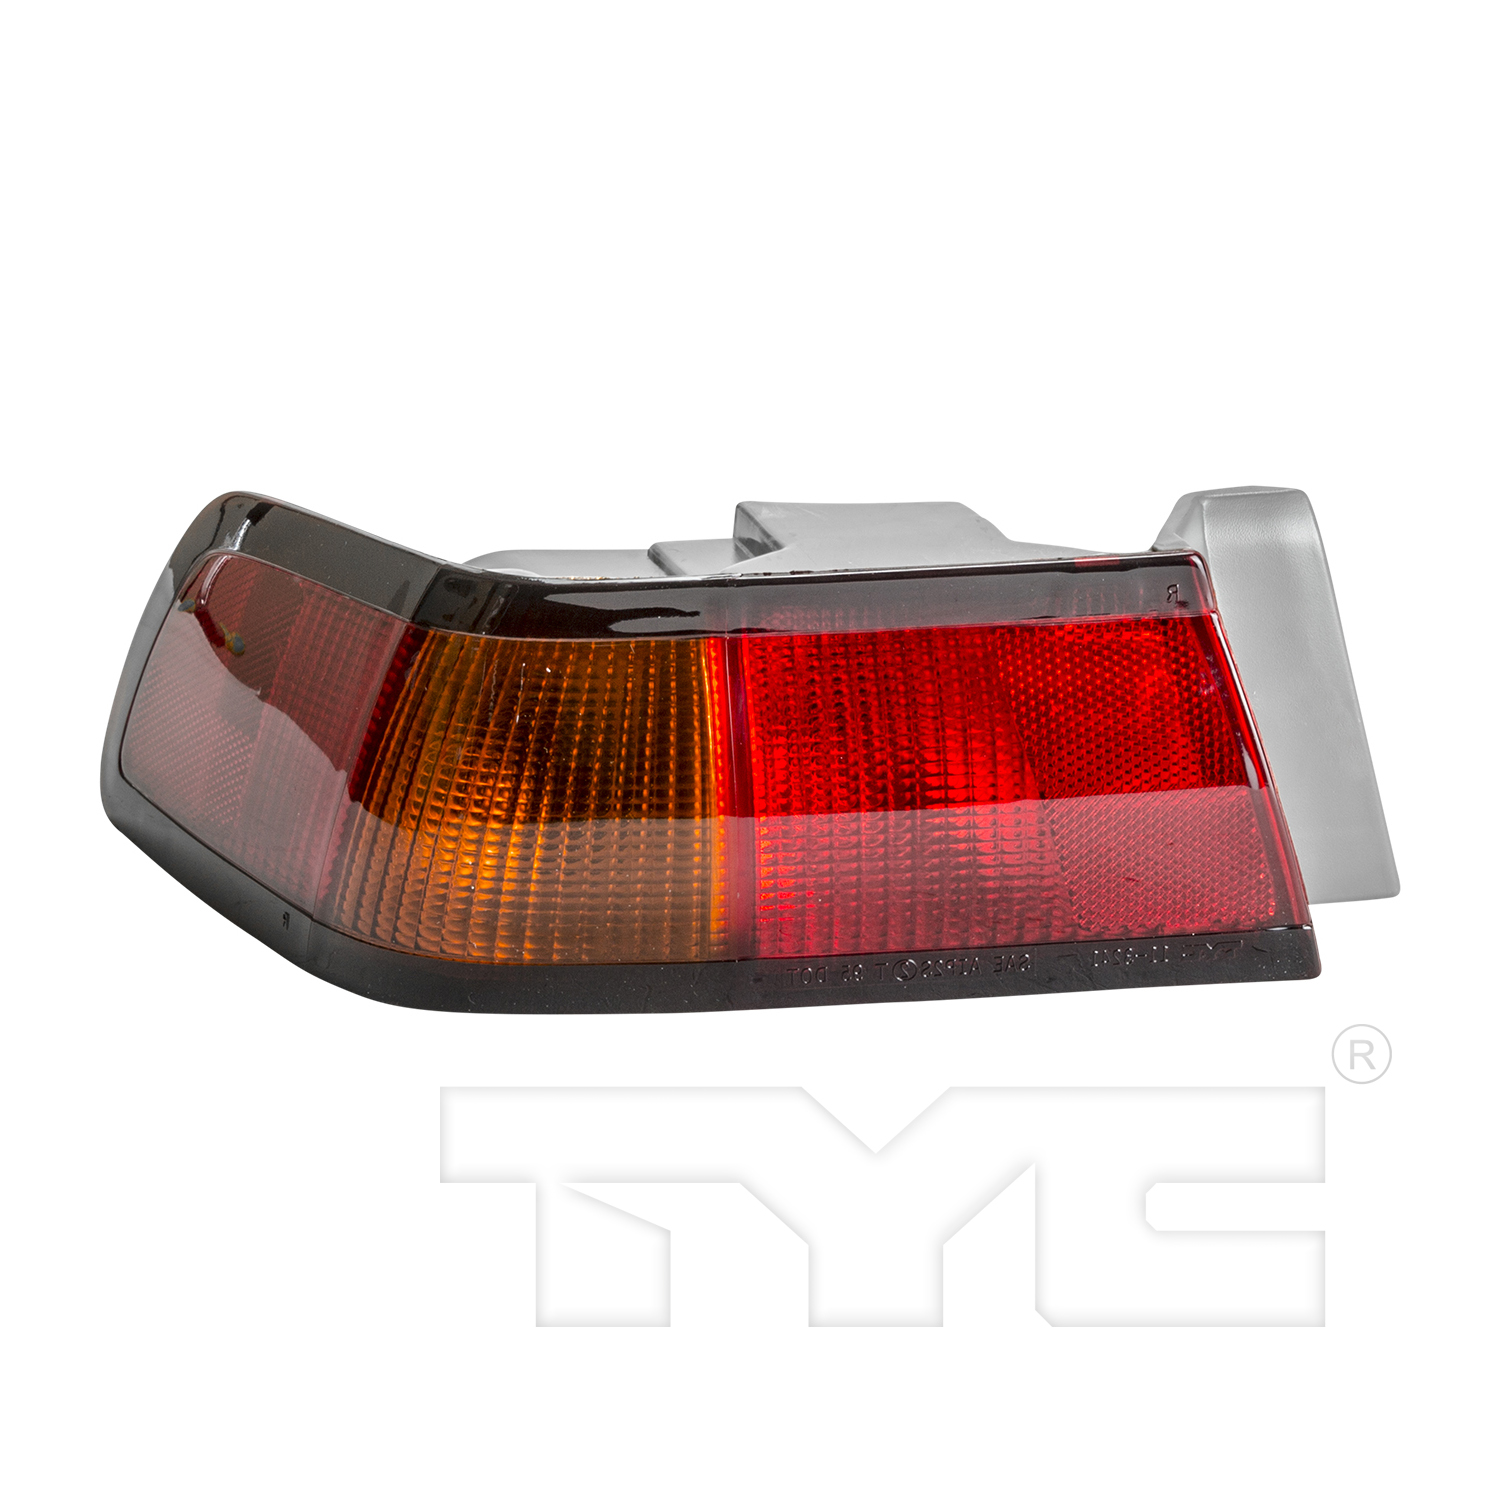 Aftermarket TAILLIGHTS for TOYOTA - CAMRY, CAMRY,97-99,LT Taillamp assy